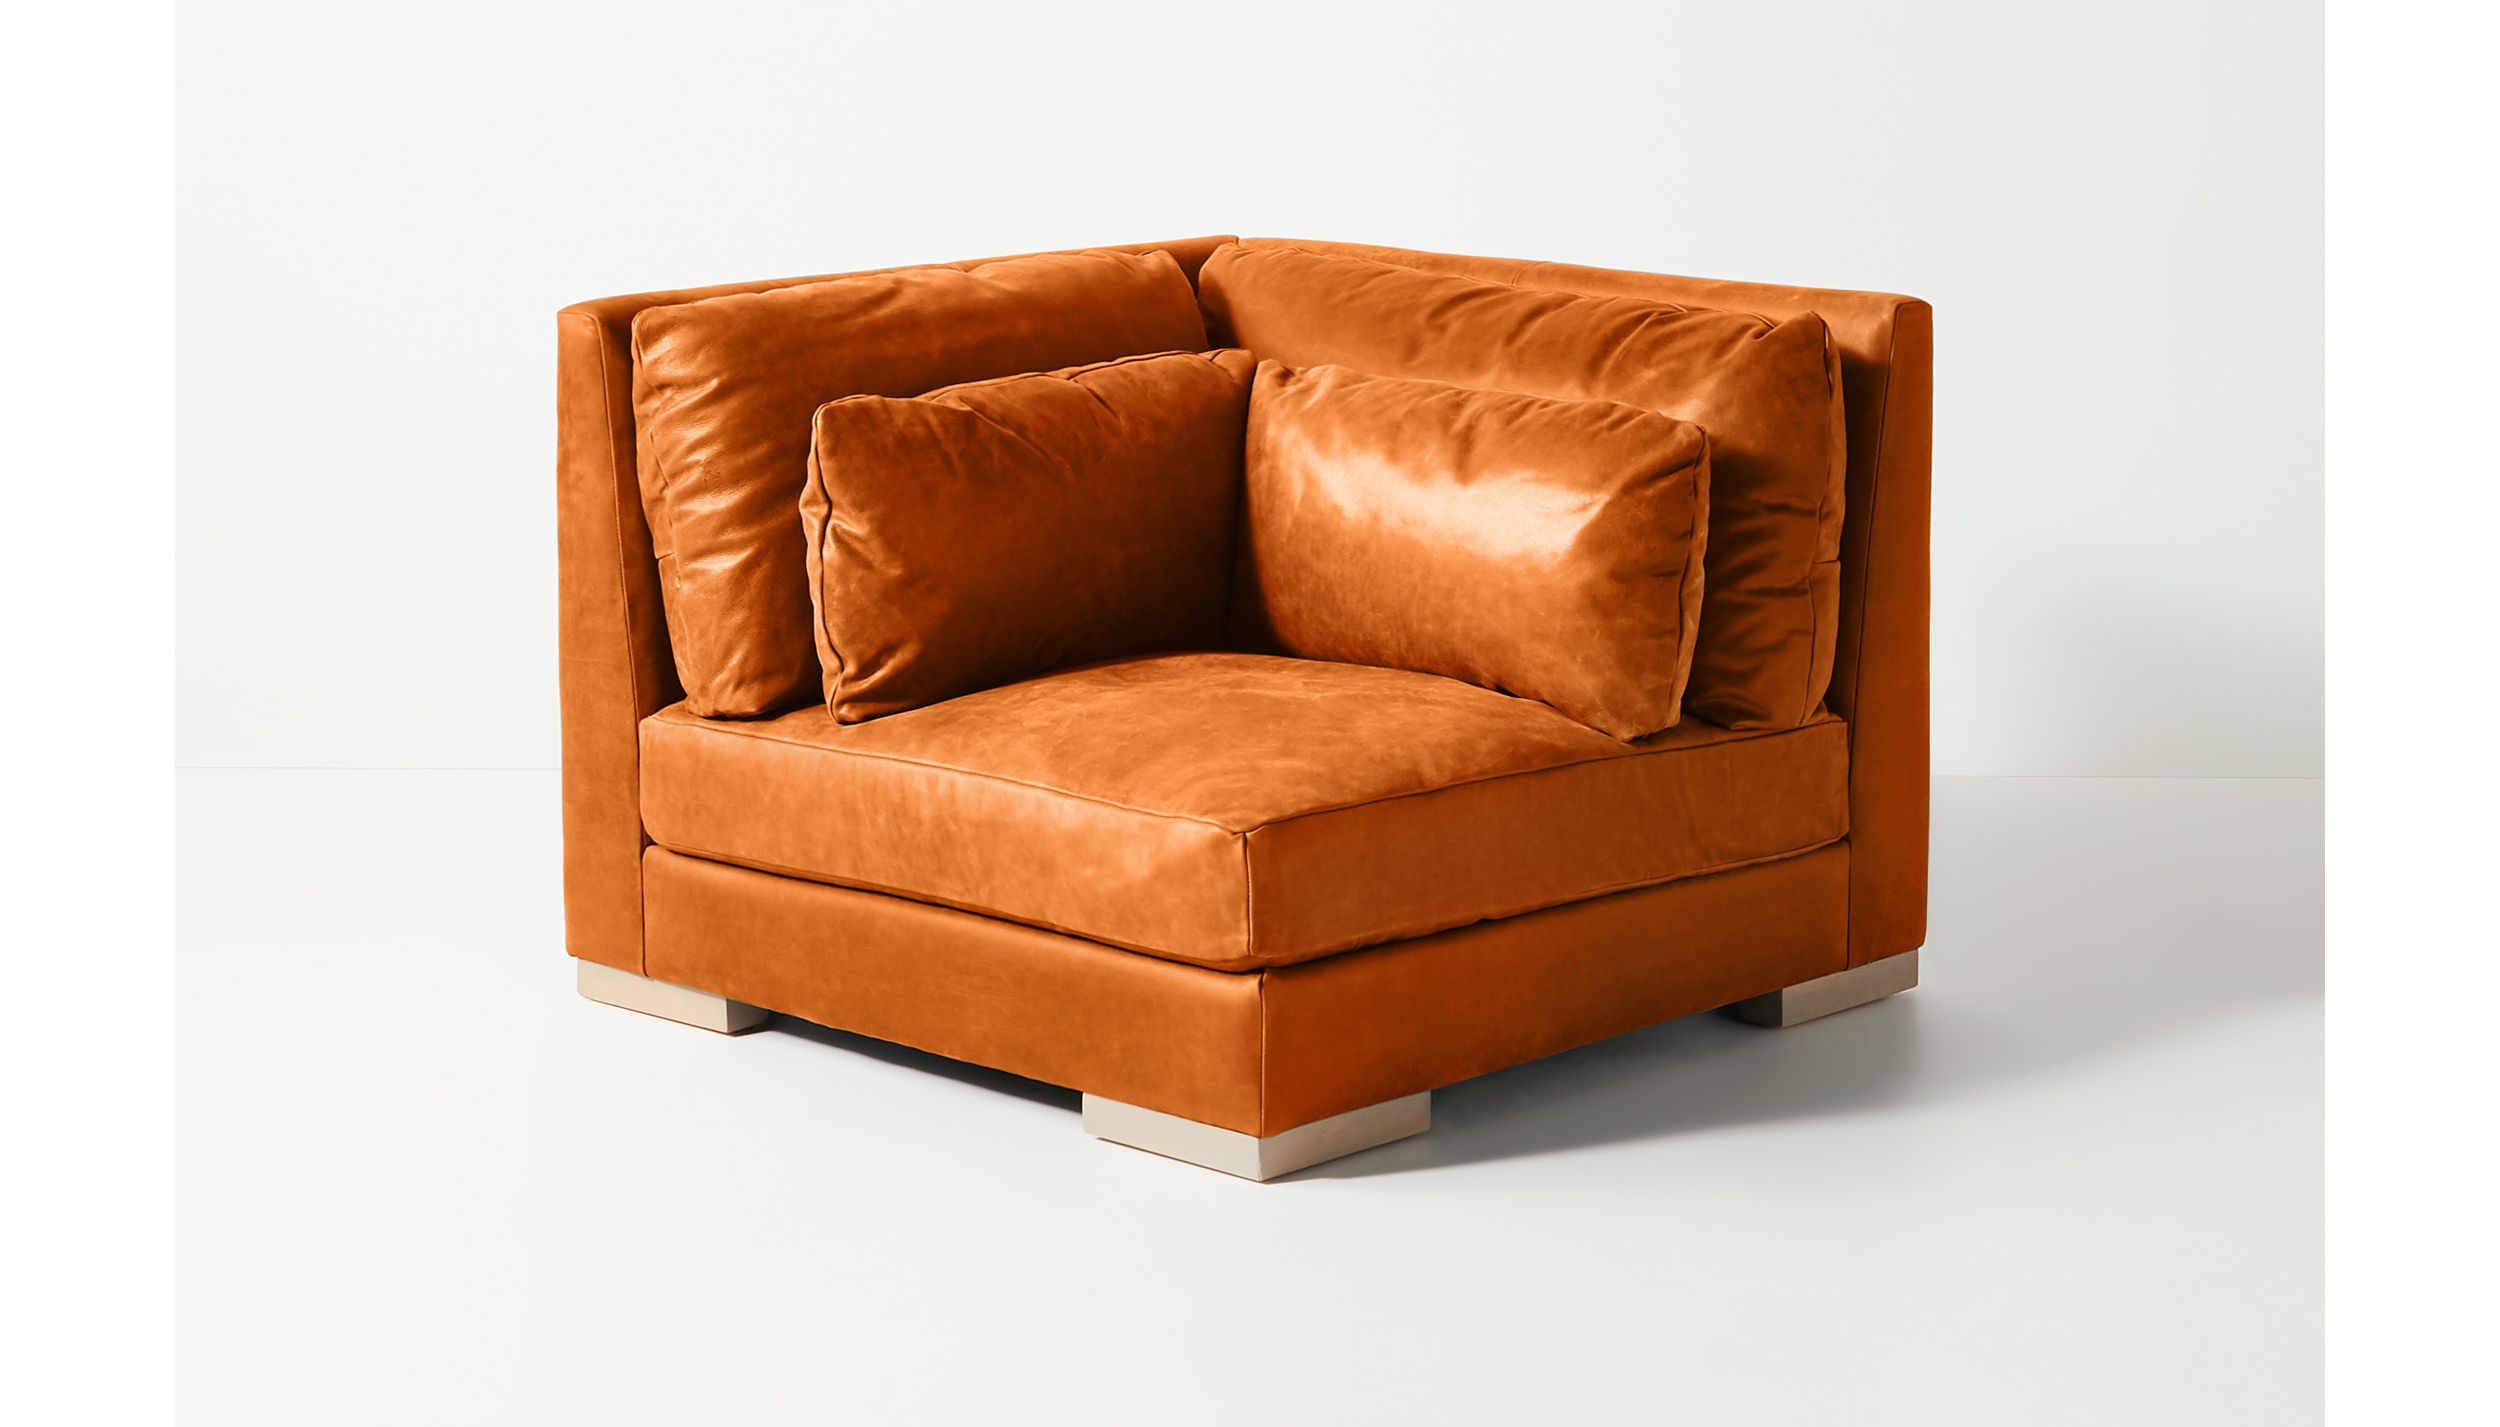 Relaxed Sunday Modular Leather Corner, Most Comfortable Leather Chair